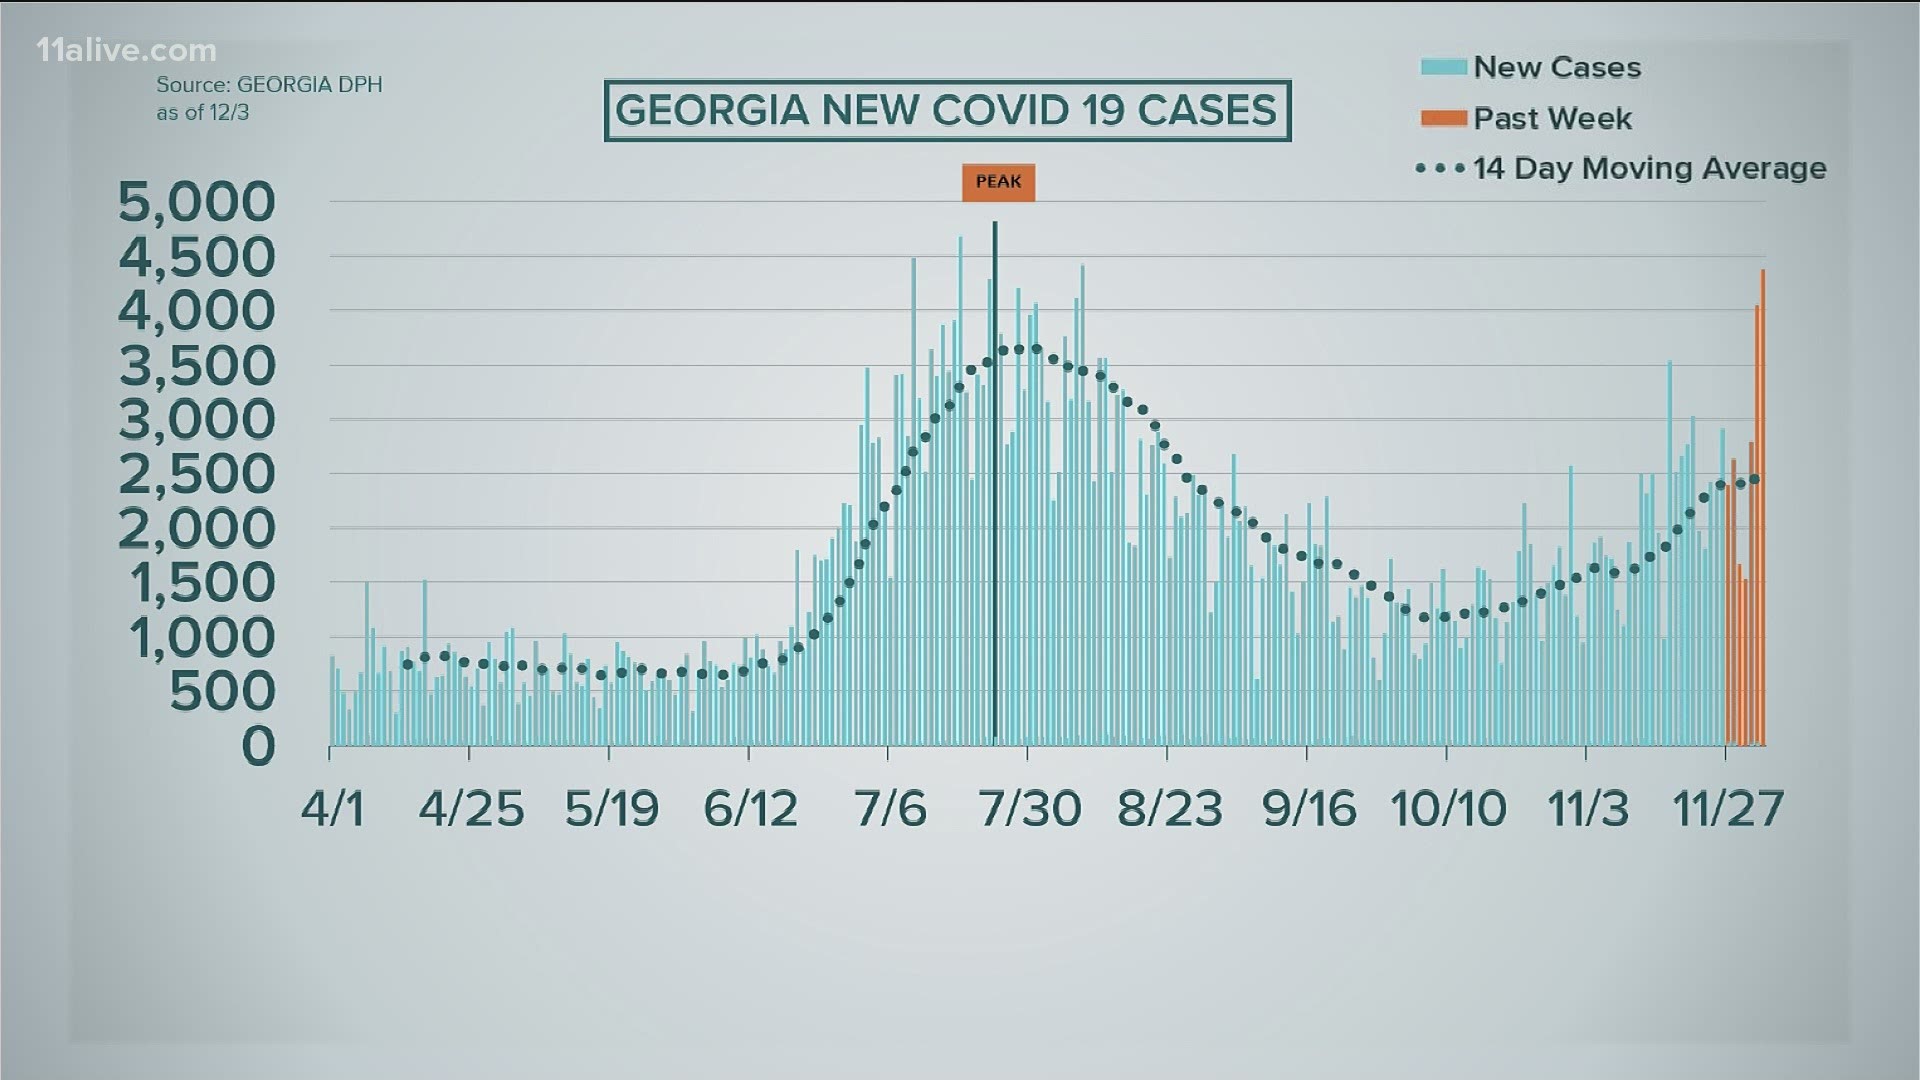 Georgia reported more than 4,300 new cases on Thursday.